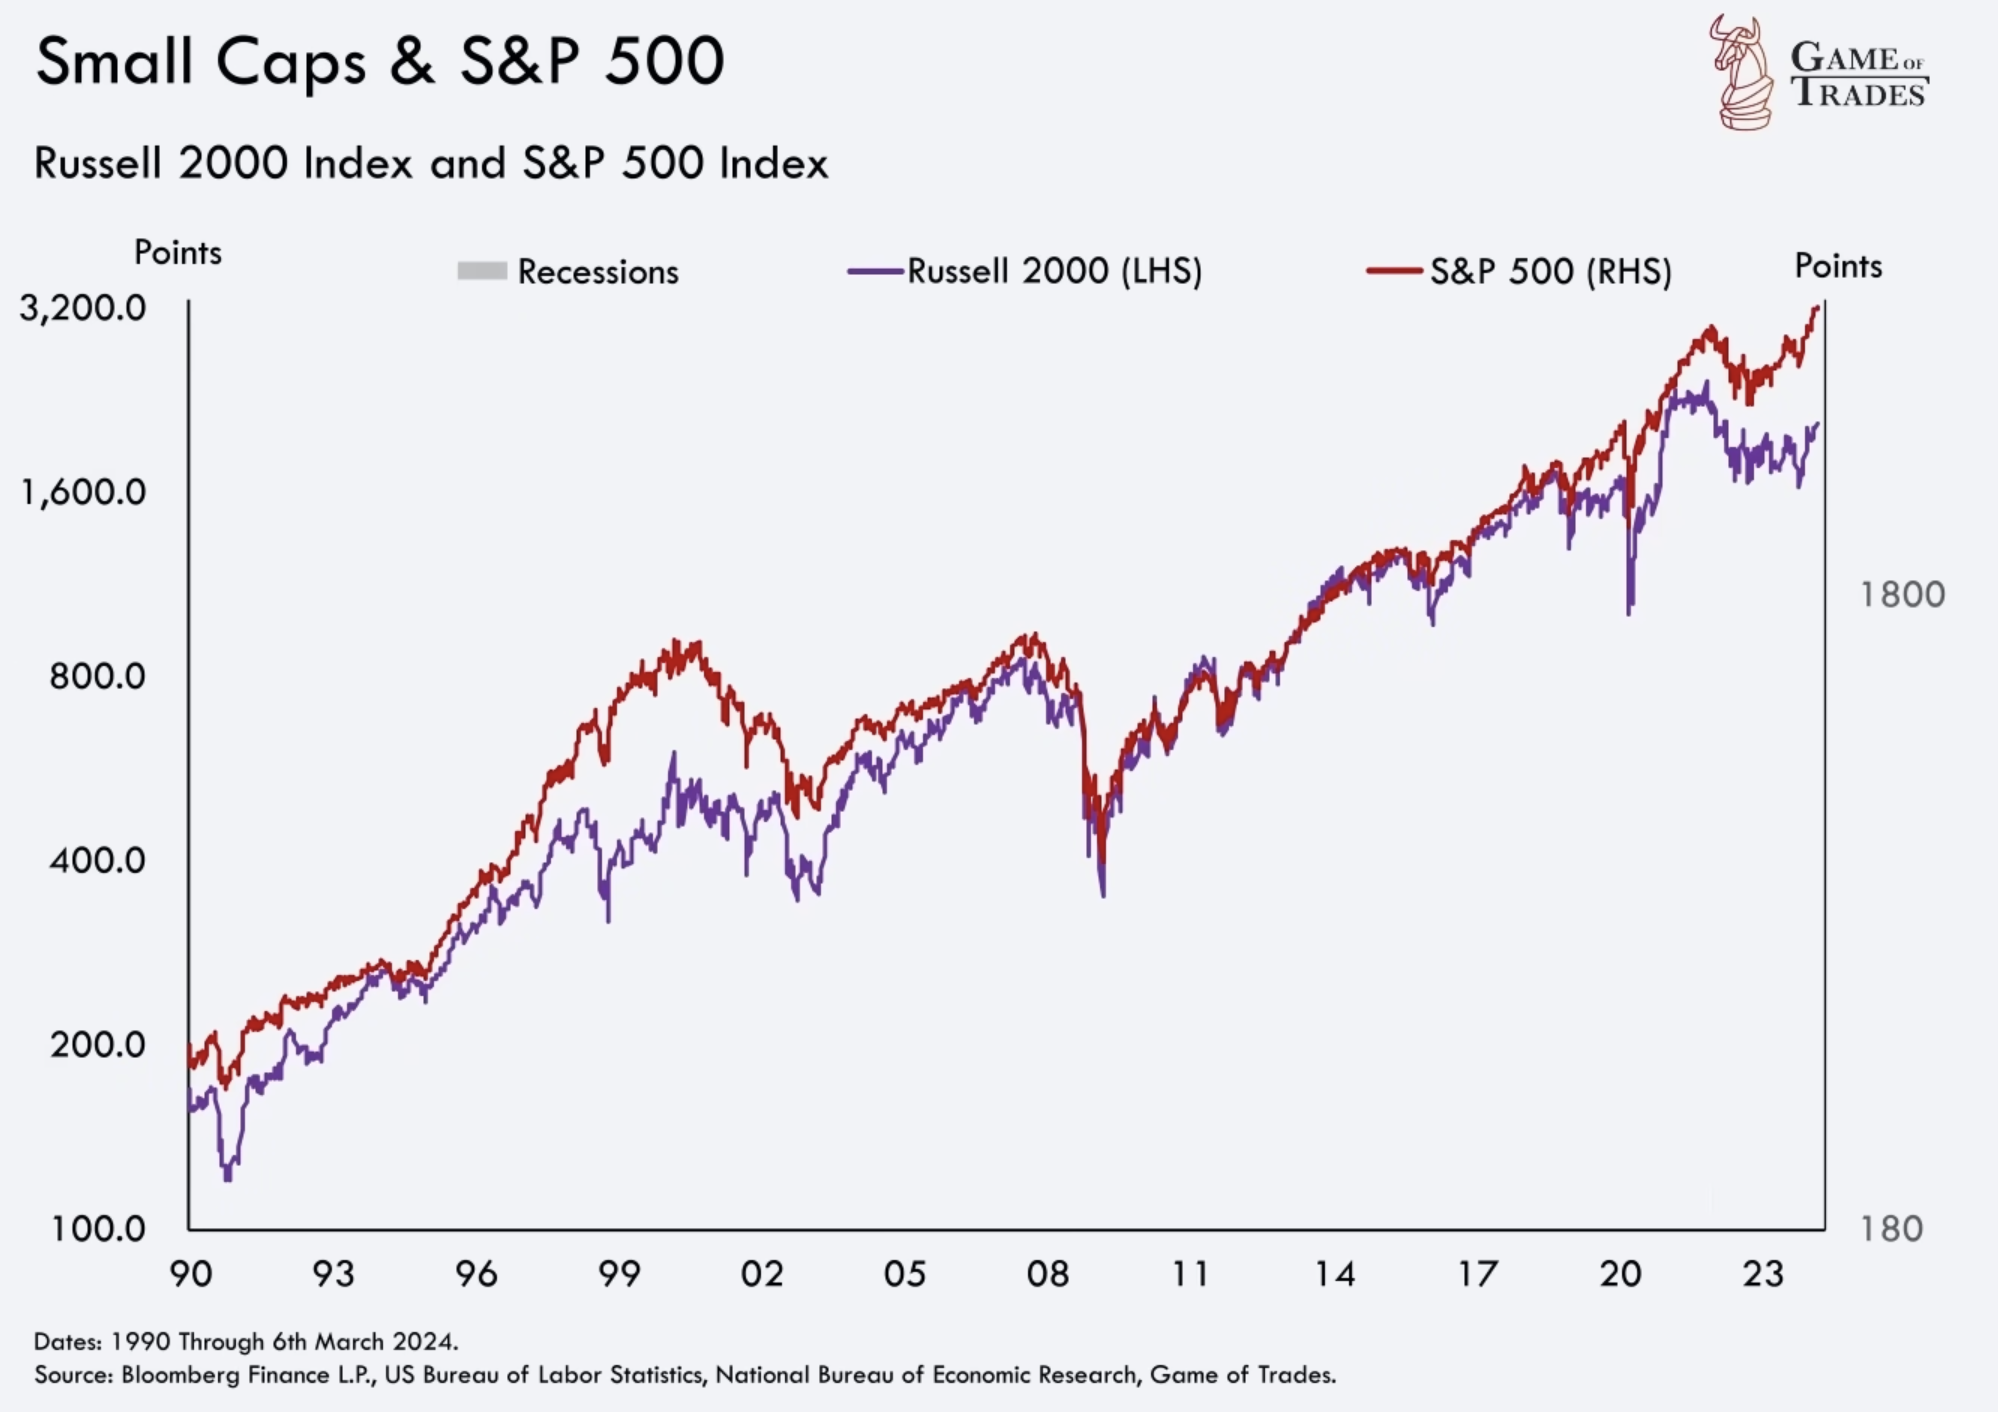 Rusell 2000 index and S&P 500 index